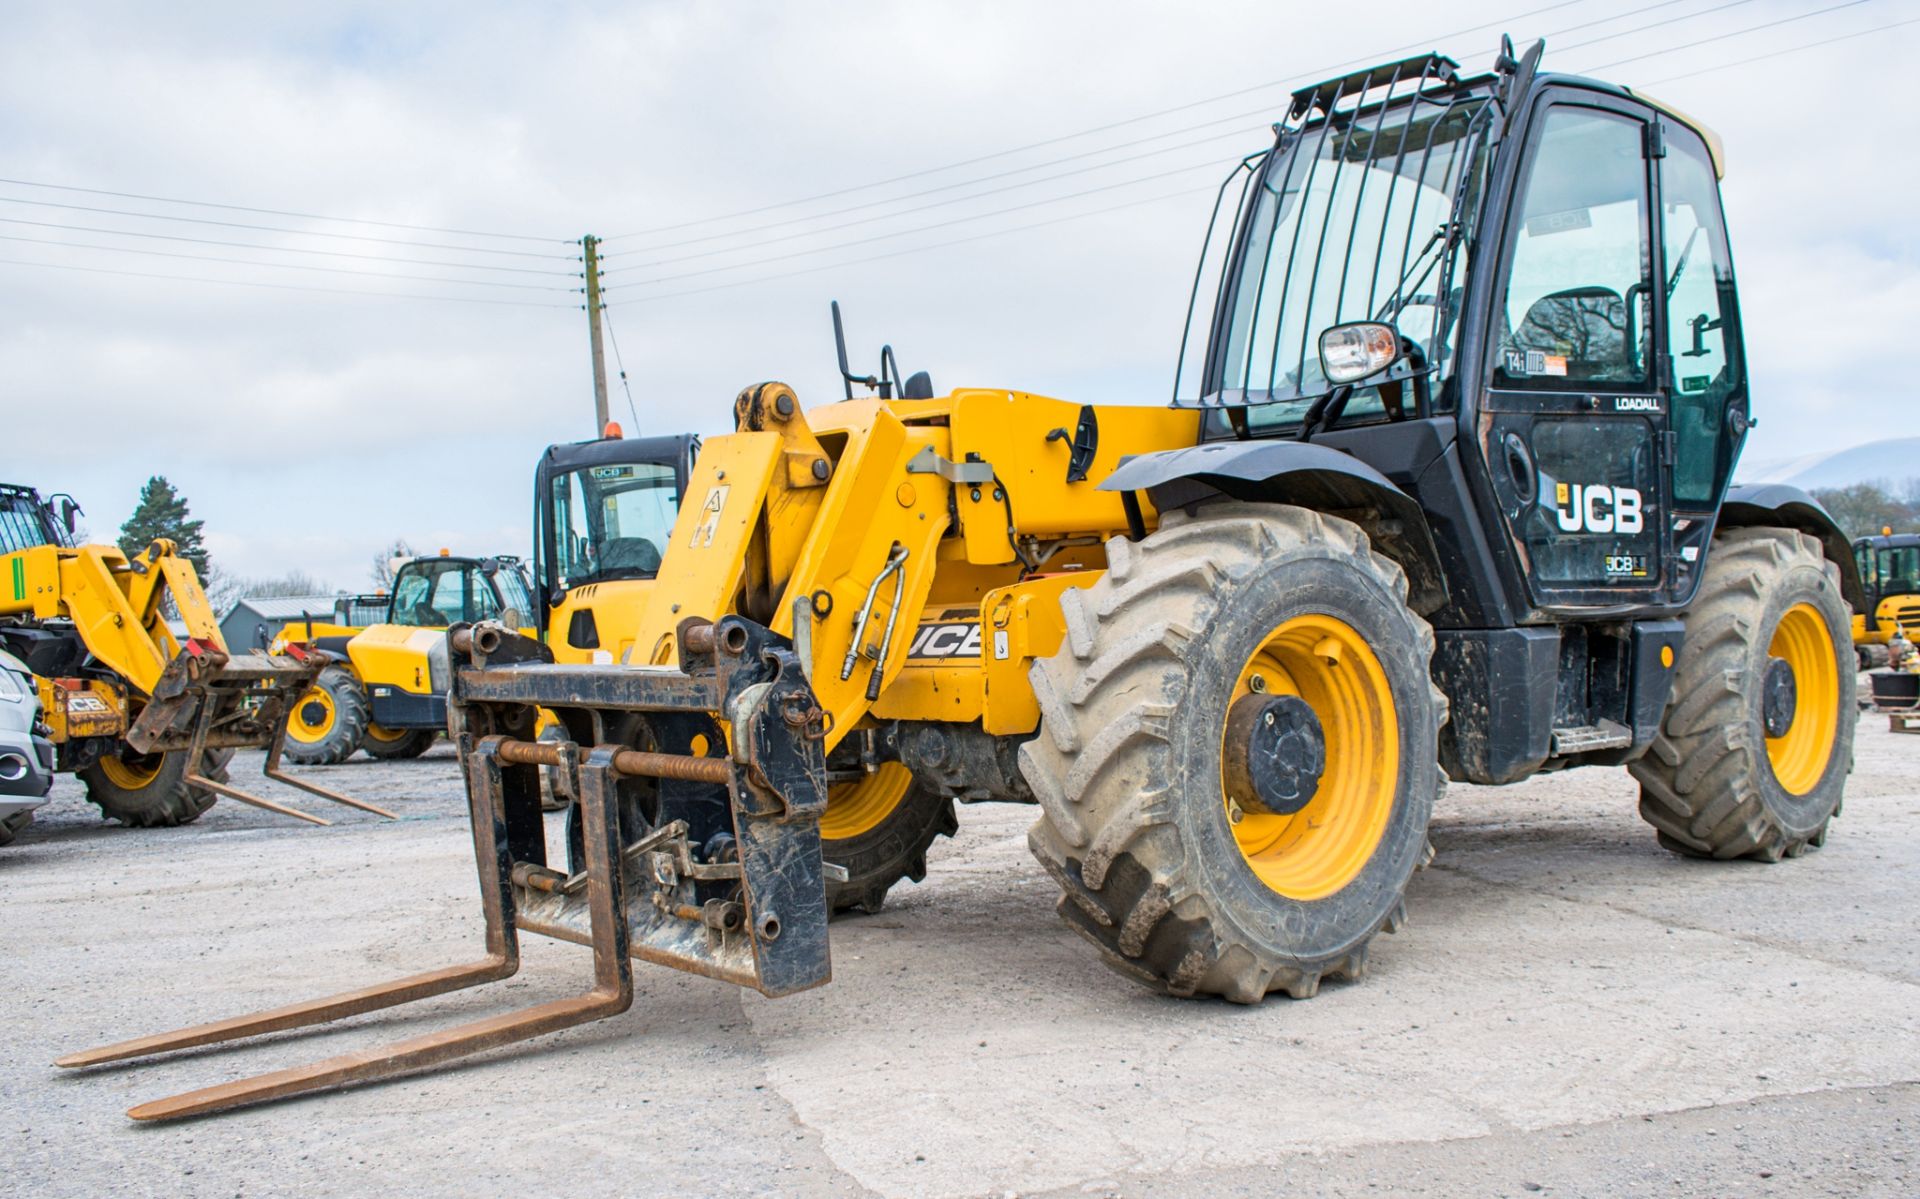 JCB 531-70 7 metre telescopic handler Year: 2013 S/N: 2178406 Recorded Hours: 1721 c/w turbo charged